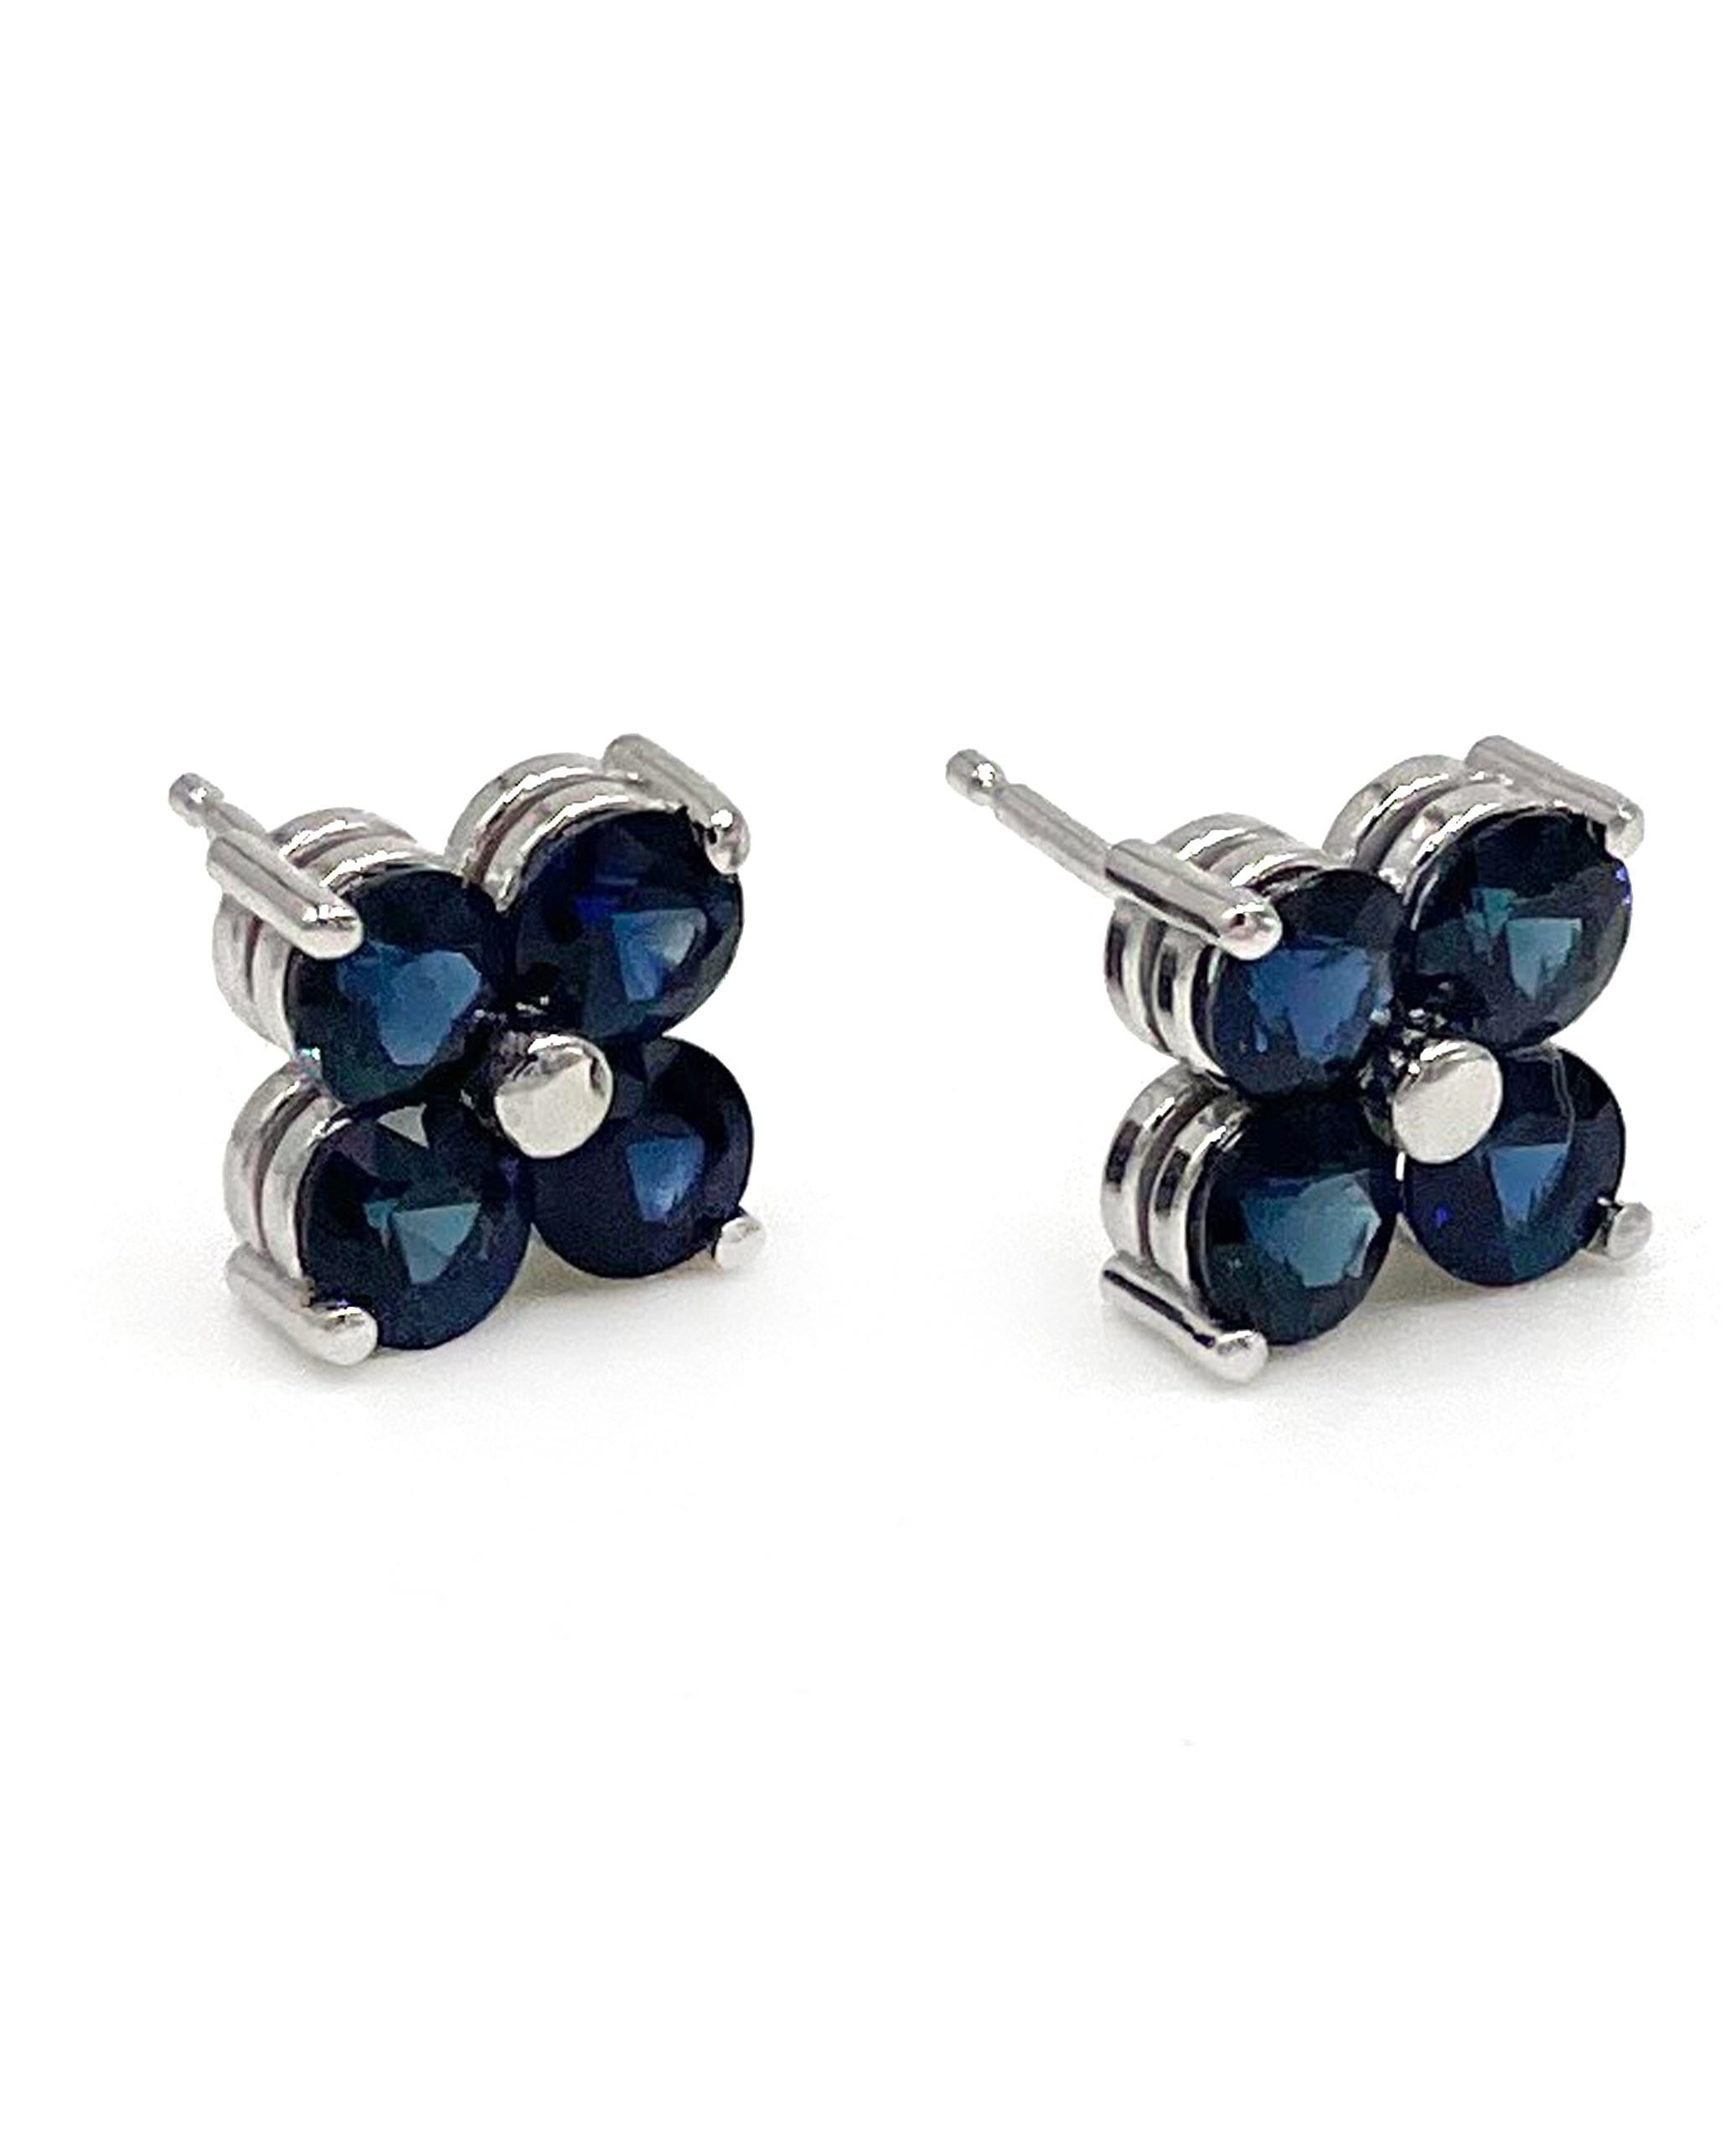 Pair of 14K white gold quatrefoil stud earrings with eight round blue sapphires 2.26 carats.